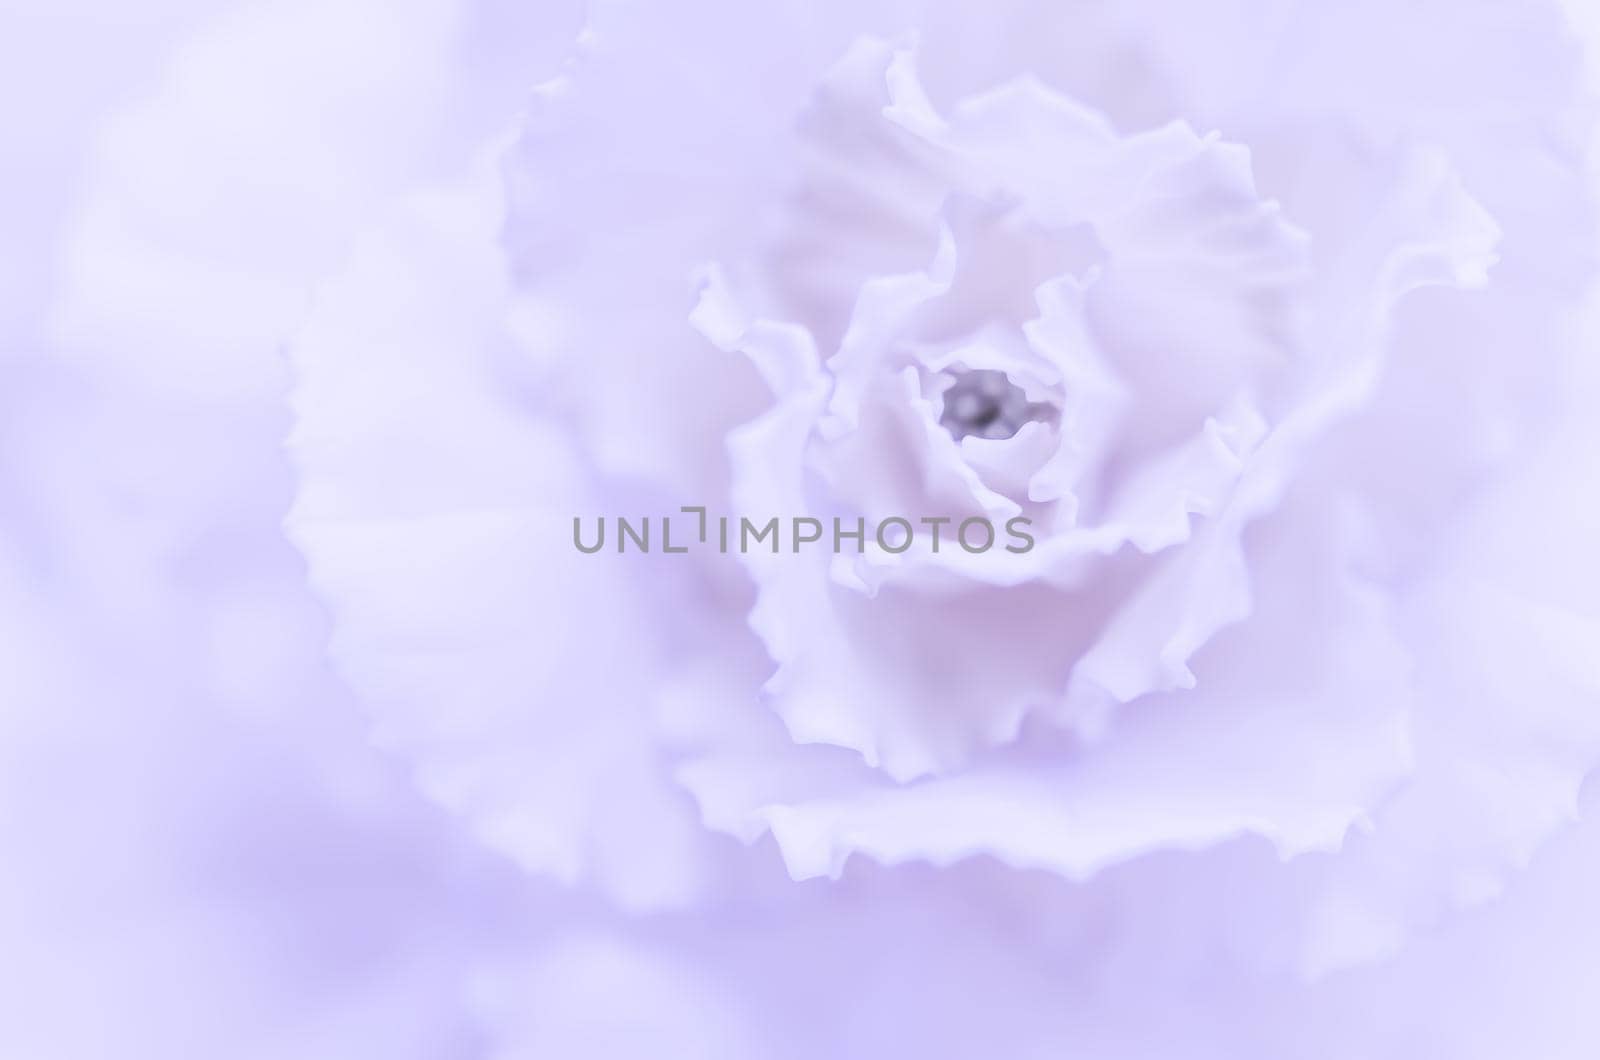 Retro art, vintage card and botanical concept - Abstract floral background, pale violet carnation flower. Macro flowers backdrop for holiday brand design